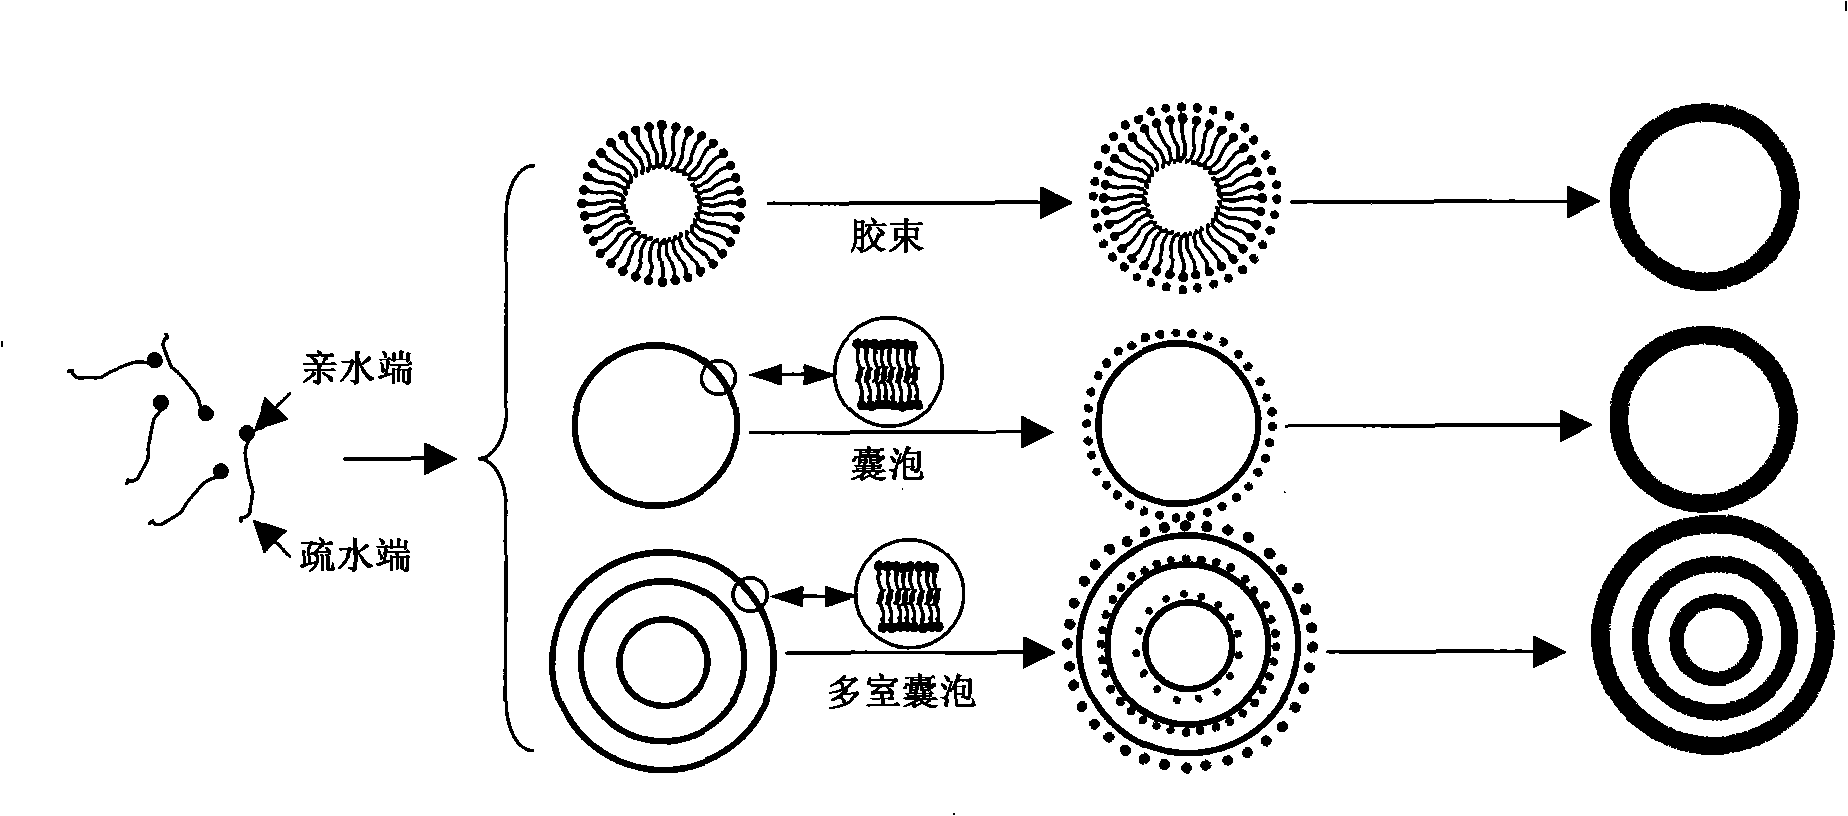 Method for producing multi-layer hollow pellet or stephanoporate pellet with multi-chamber vesicle mould plate method